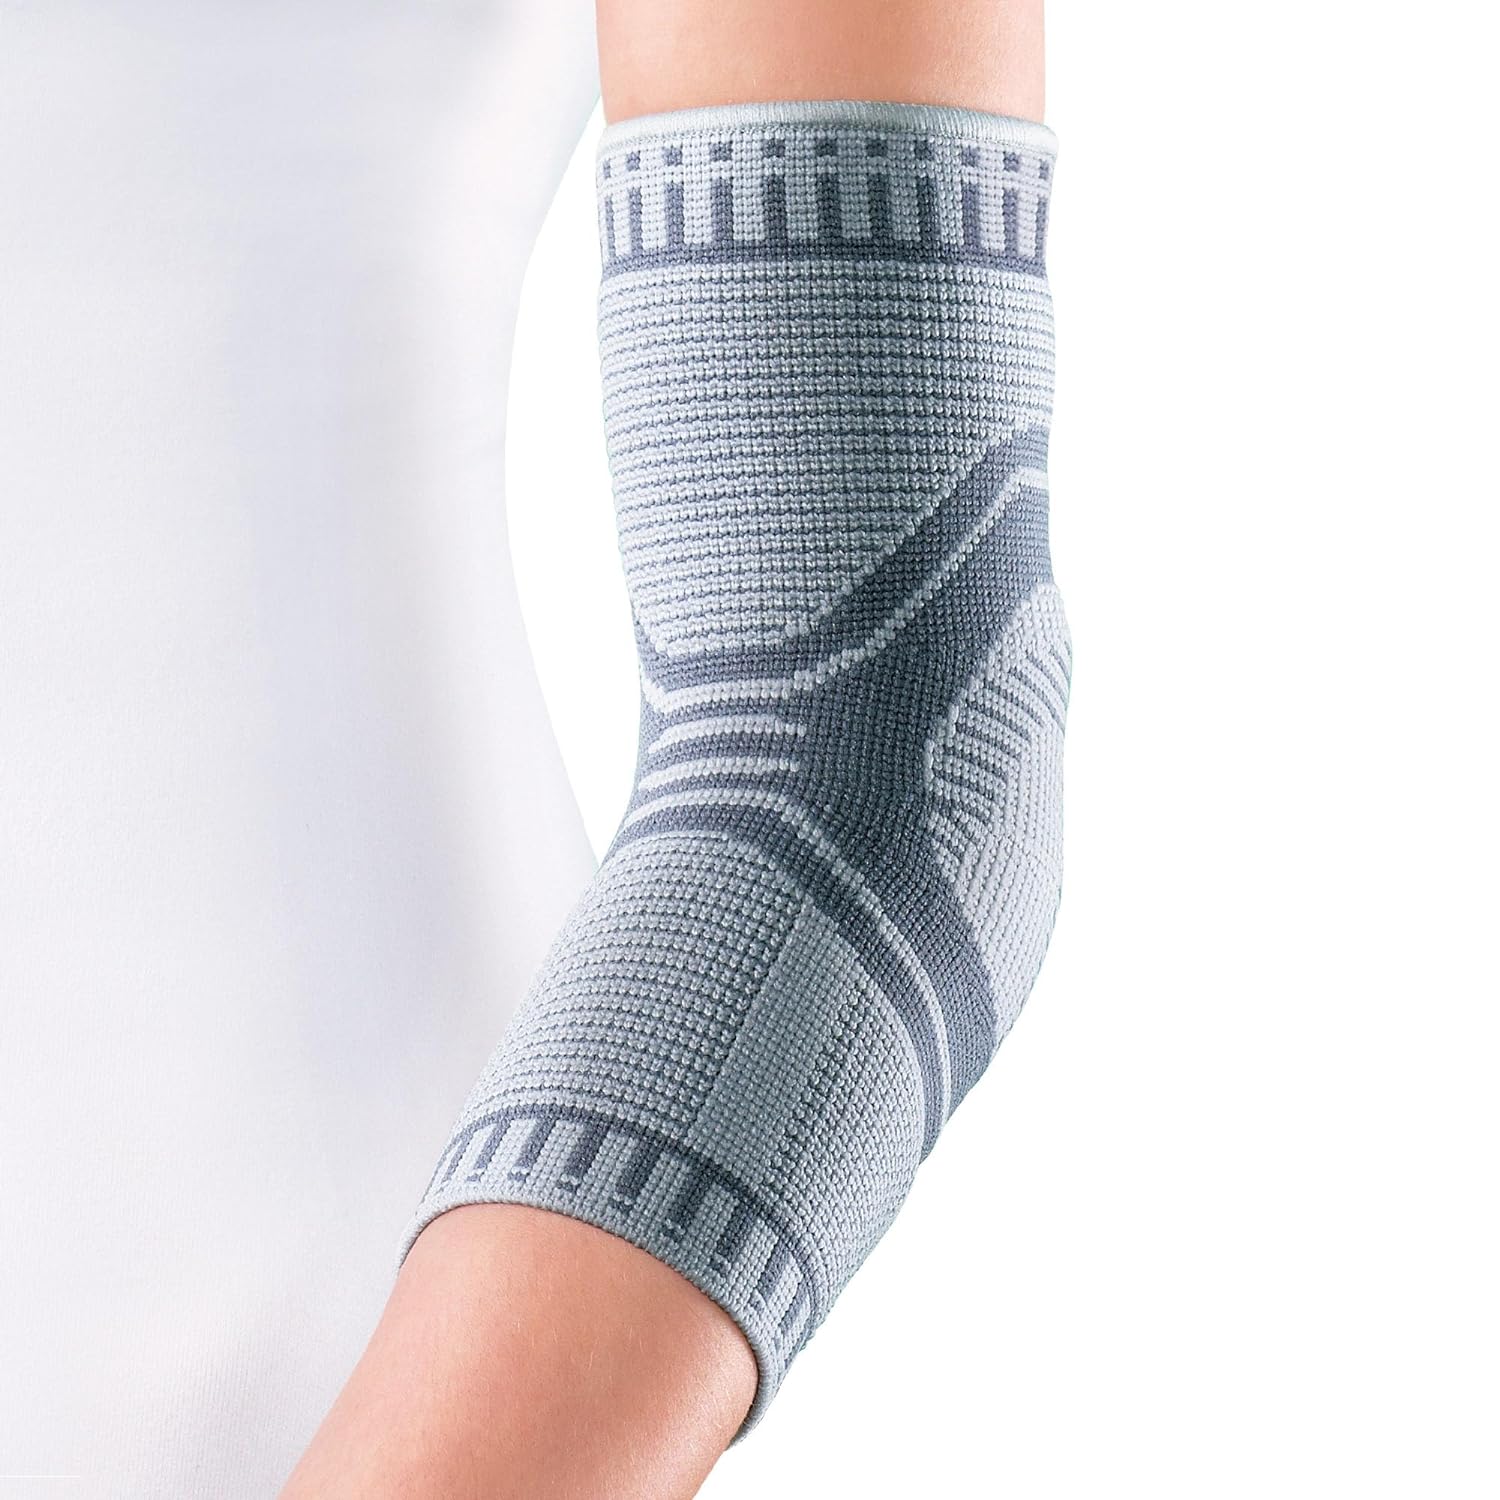 OPPO 2988 ACCUTEX Elbow Compression Sleeve - Brace for Tendonitis Pain Relief, Tennis Elbow, Golfer's Elbow, Arthritis, Workouts - for Women and Men (Gray, Small, Pack of 1)